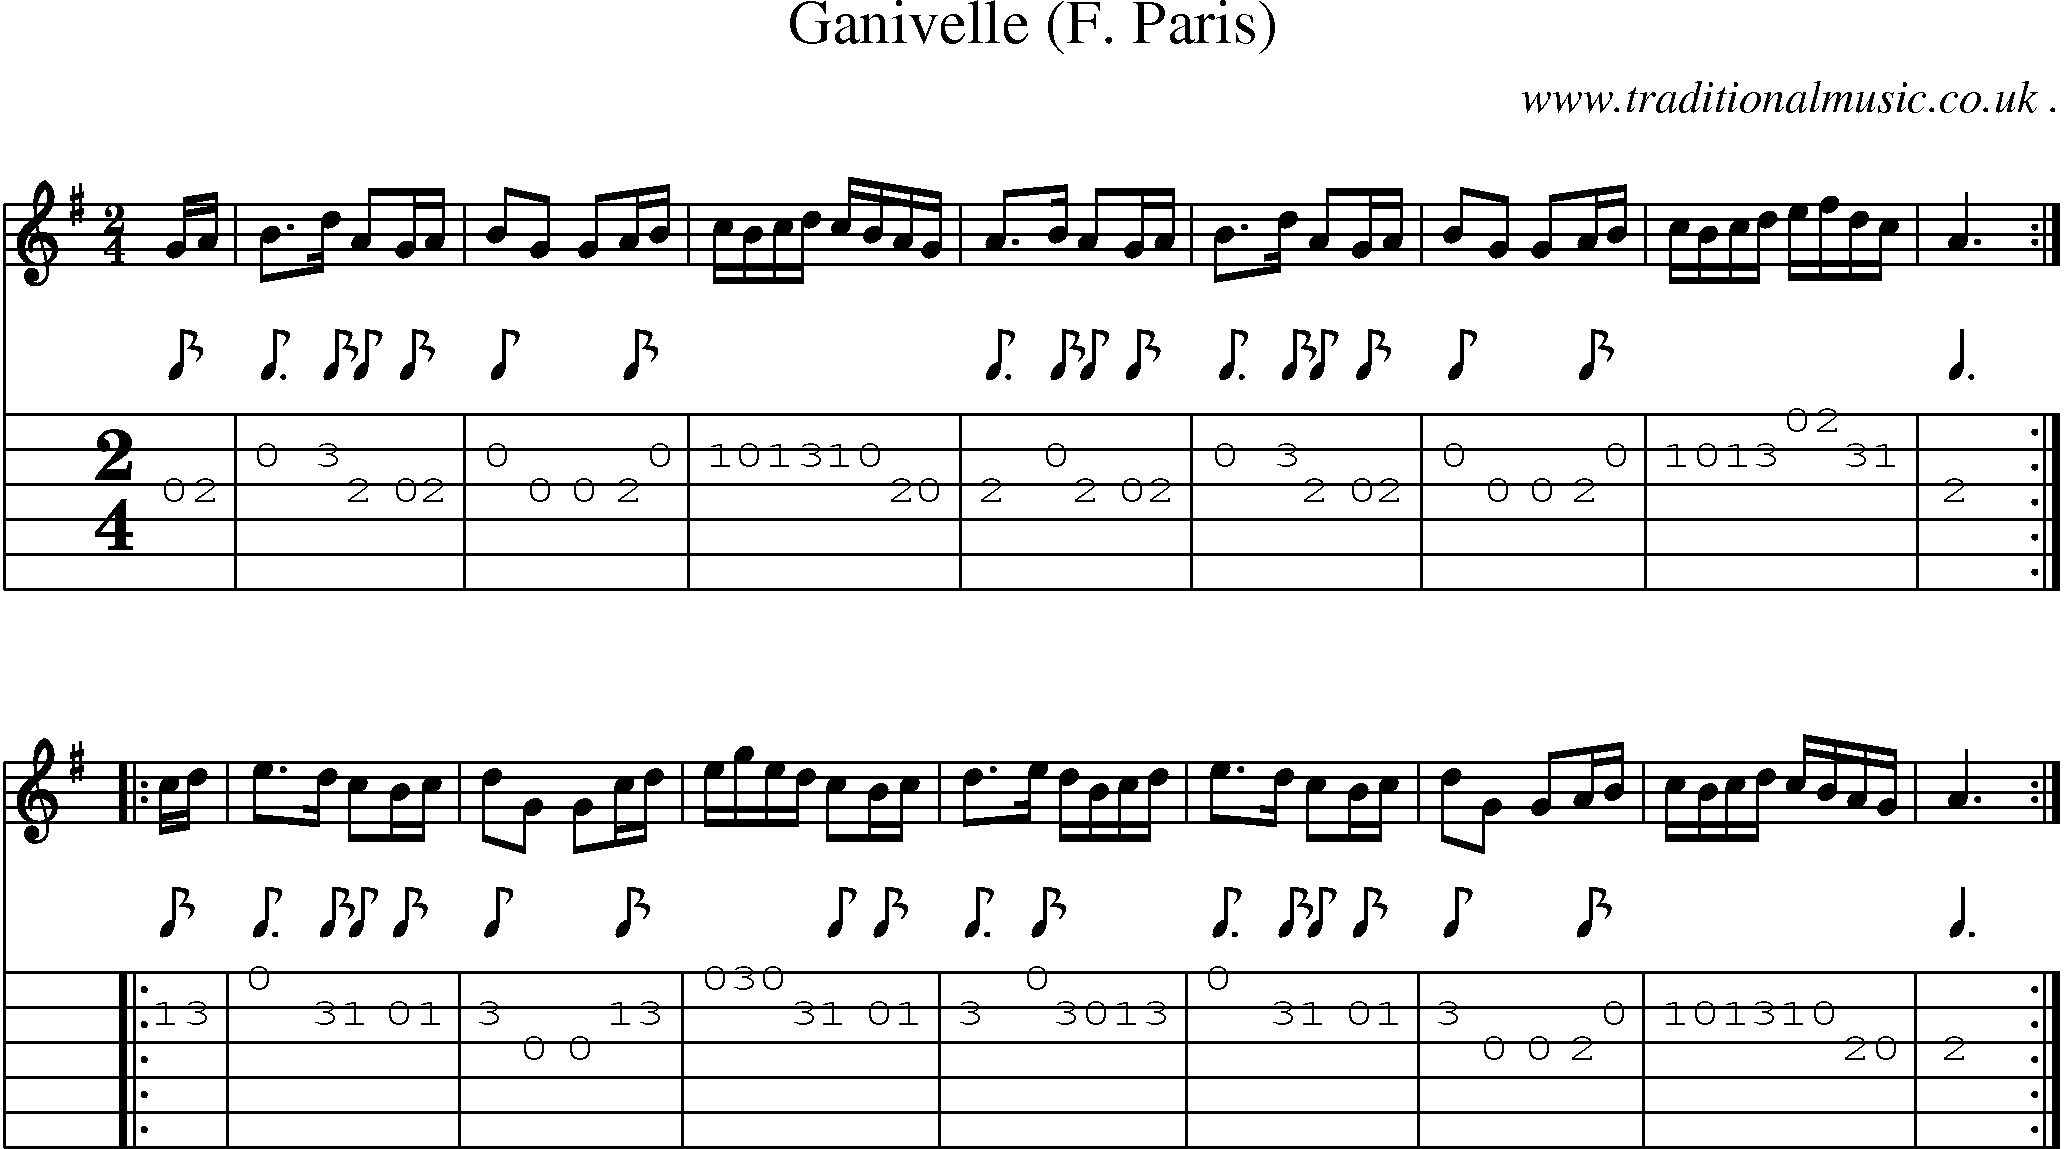 Sheet-Music and Guitar Tabs for Ganivelle (f Paris)